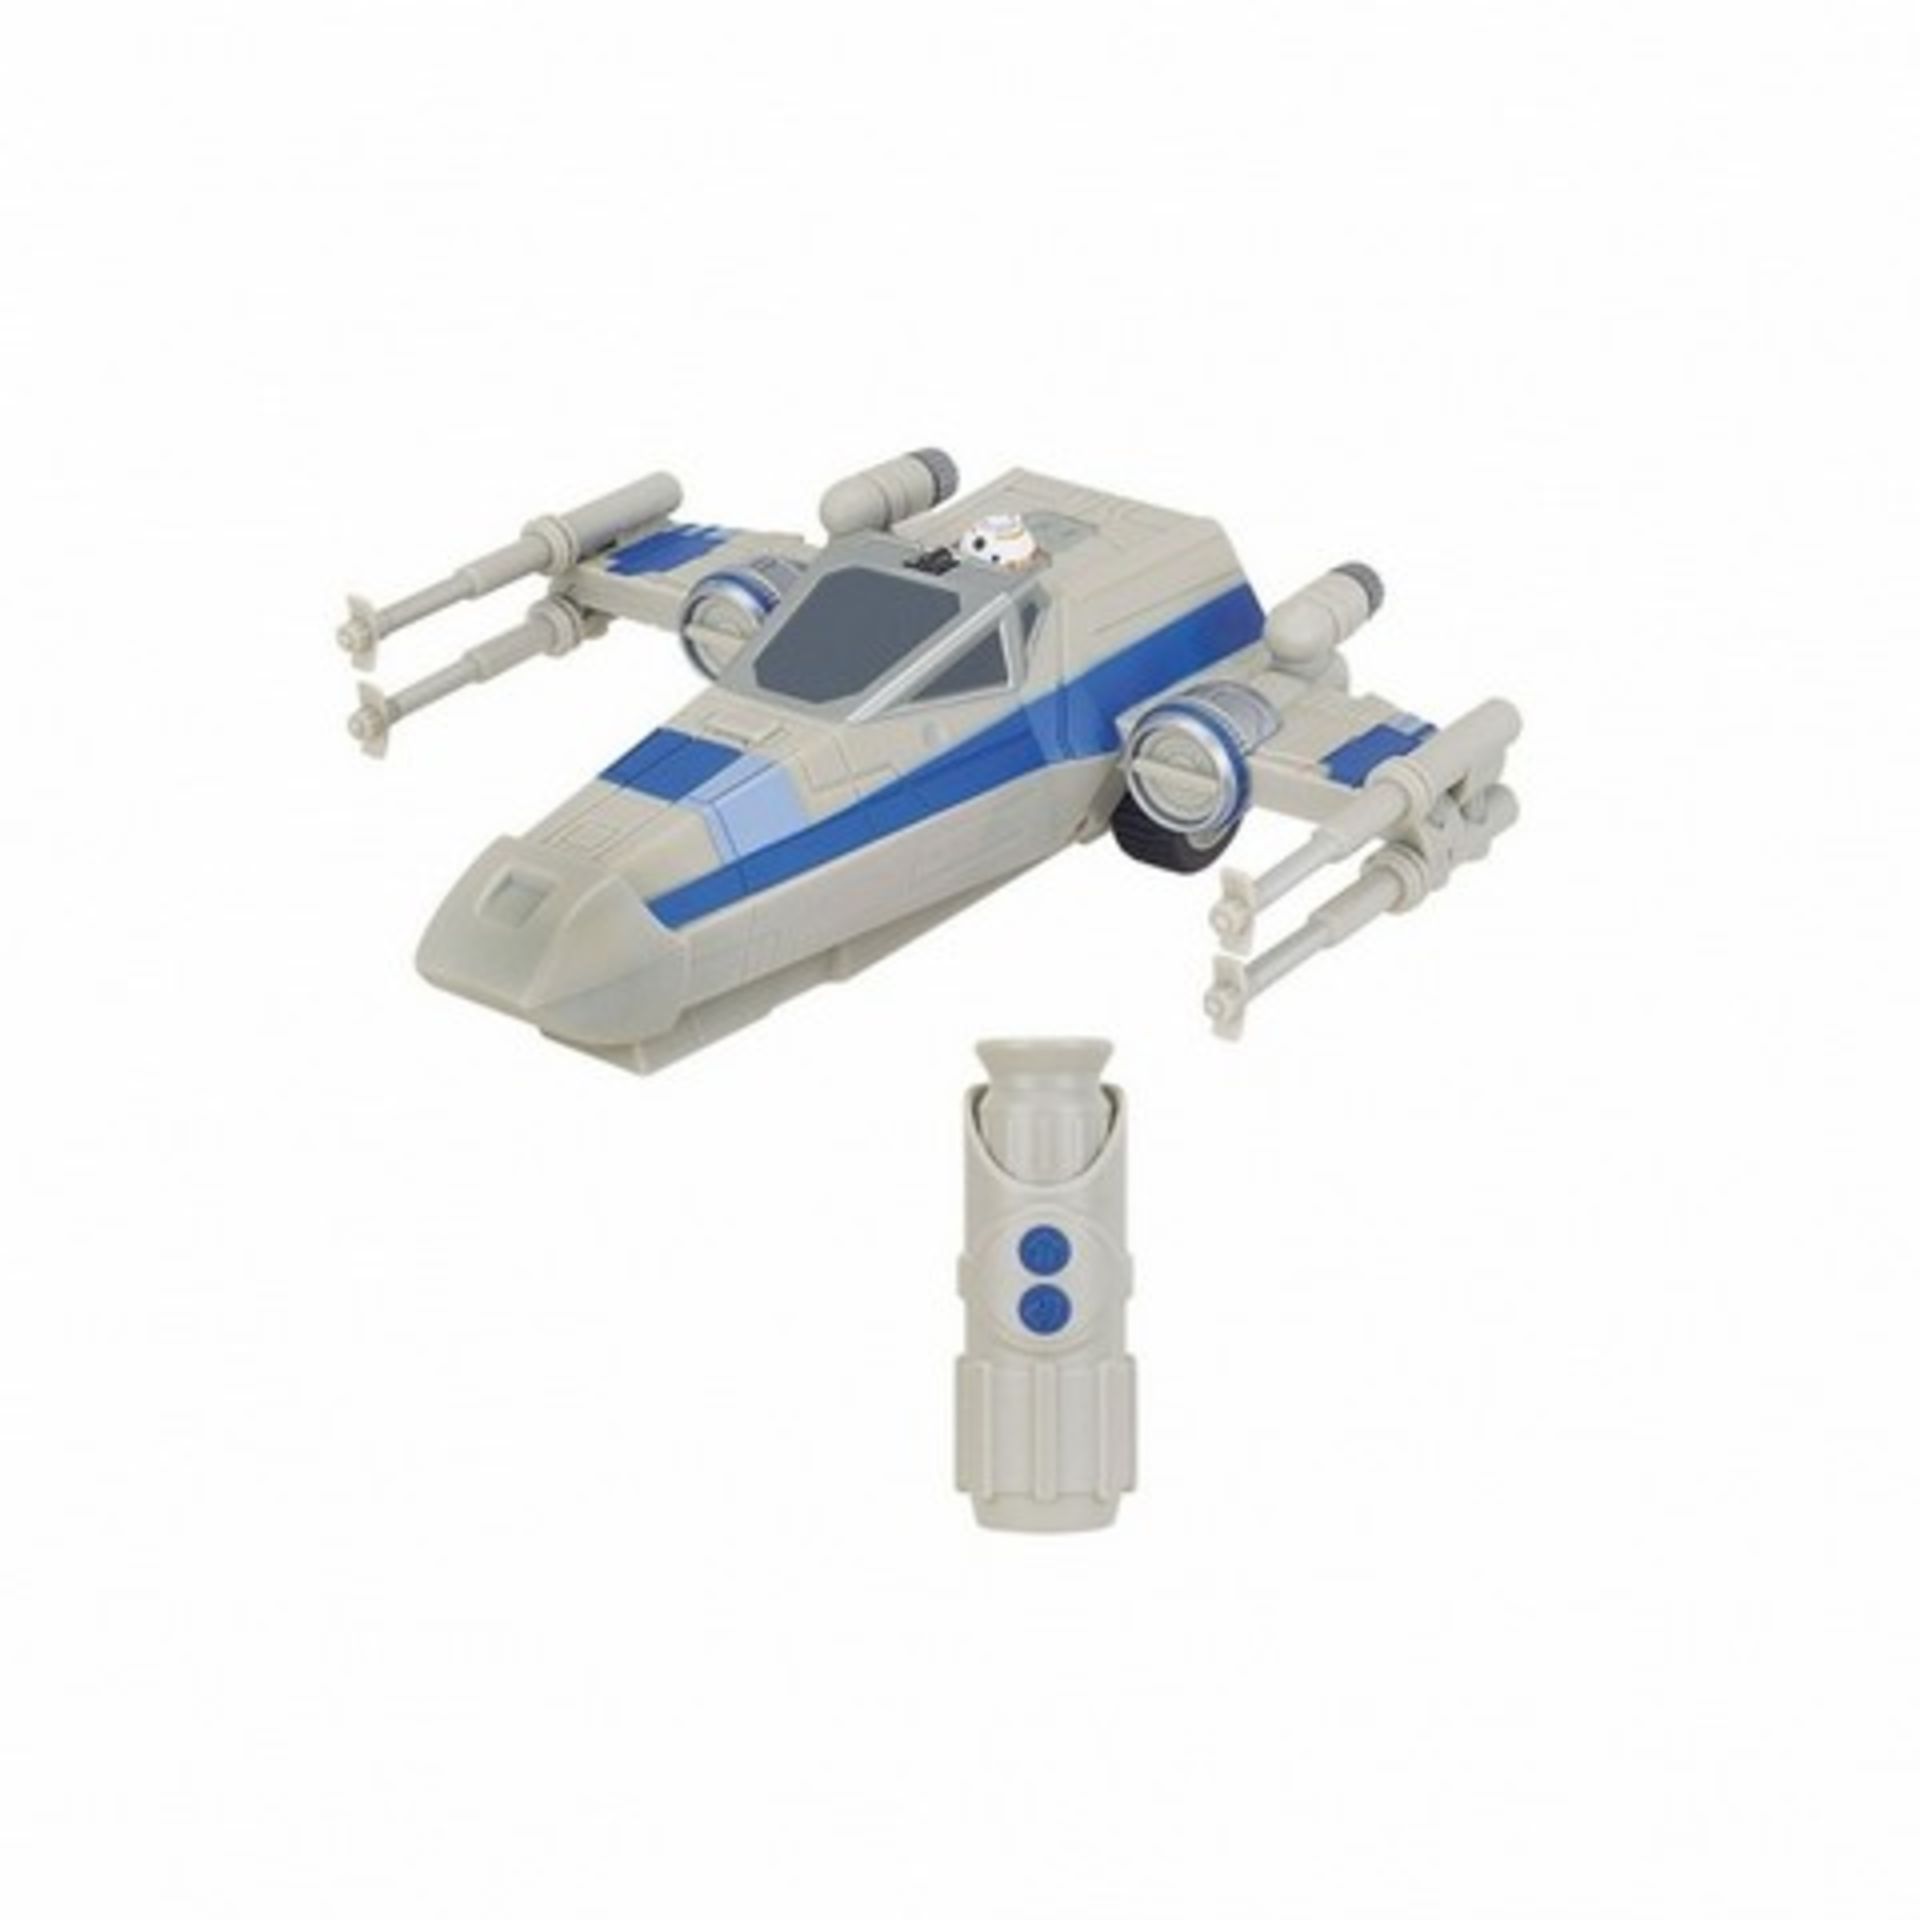 + VAT Brand New Star Wars Resistance X-Wing Fighter Vehicle With Remote Control ISP £27.99 (